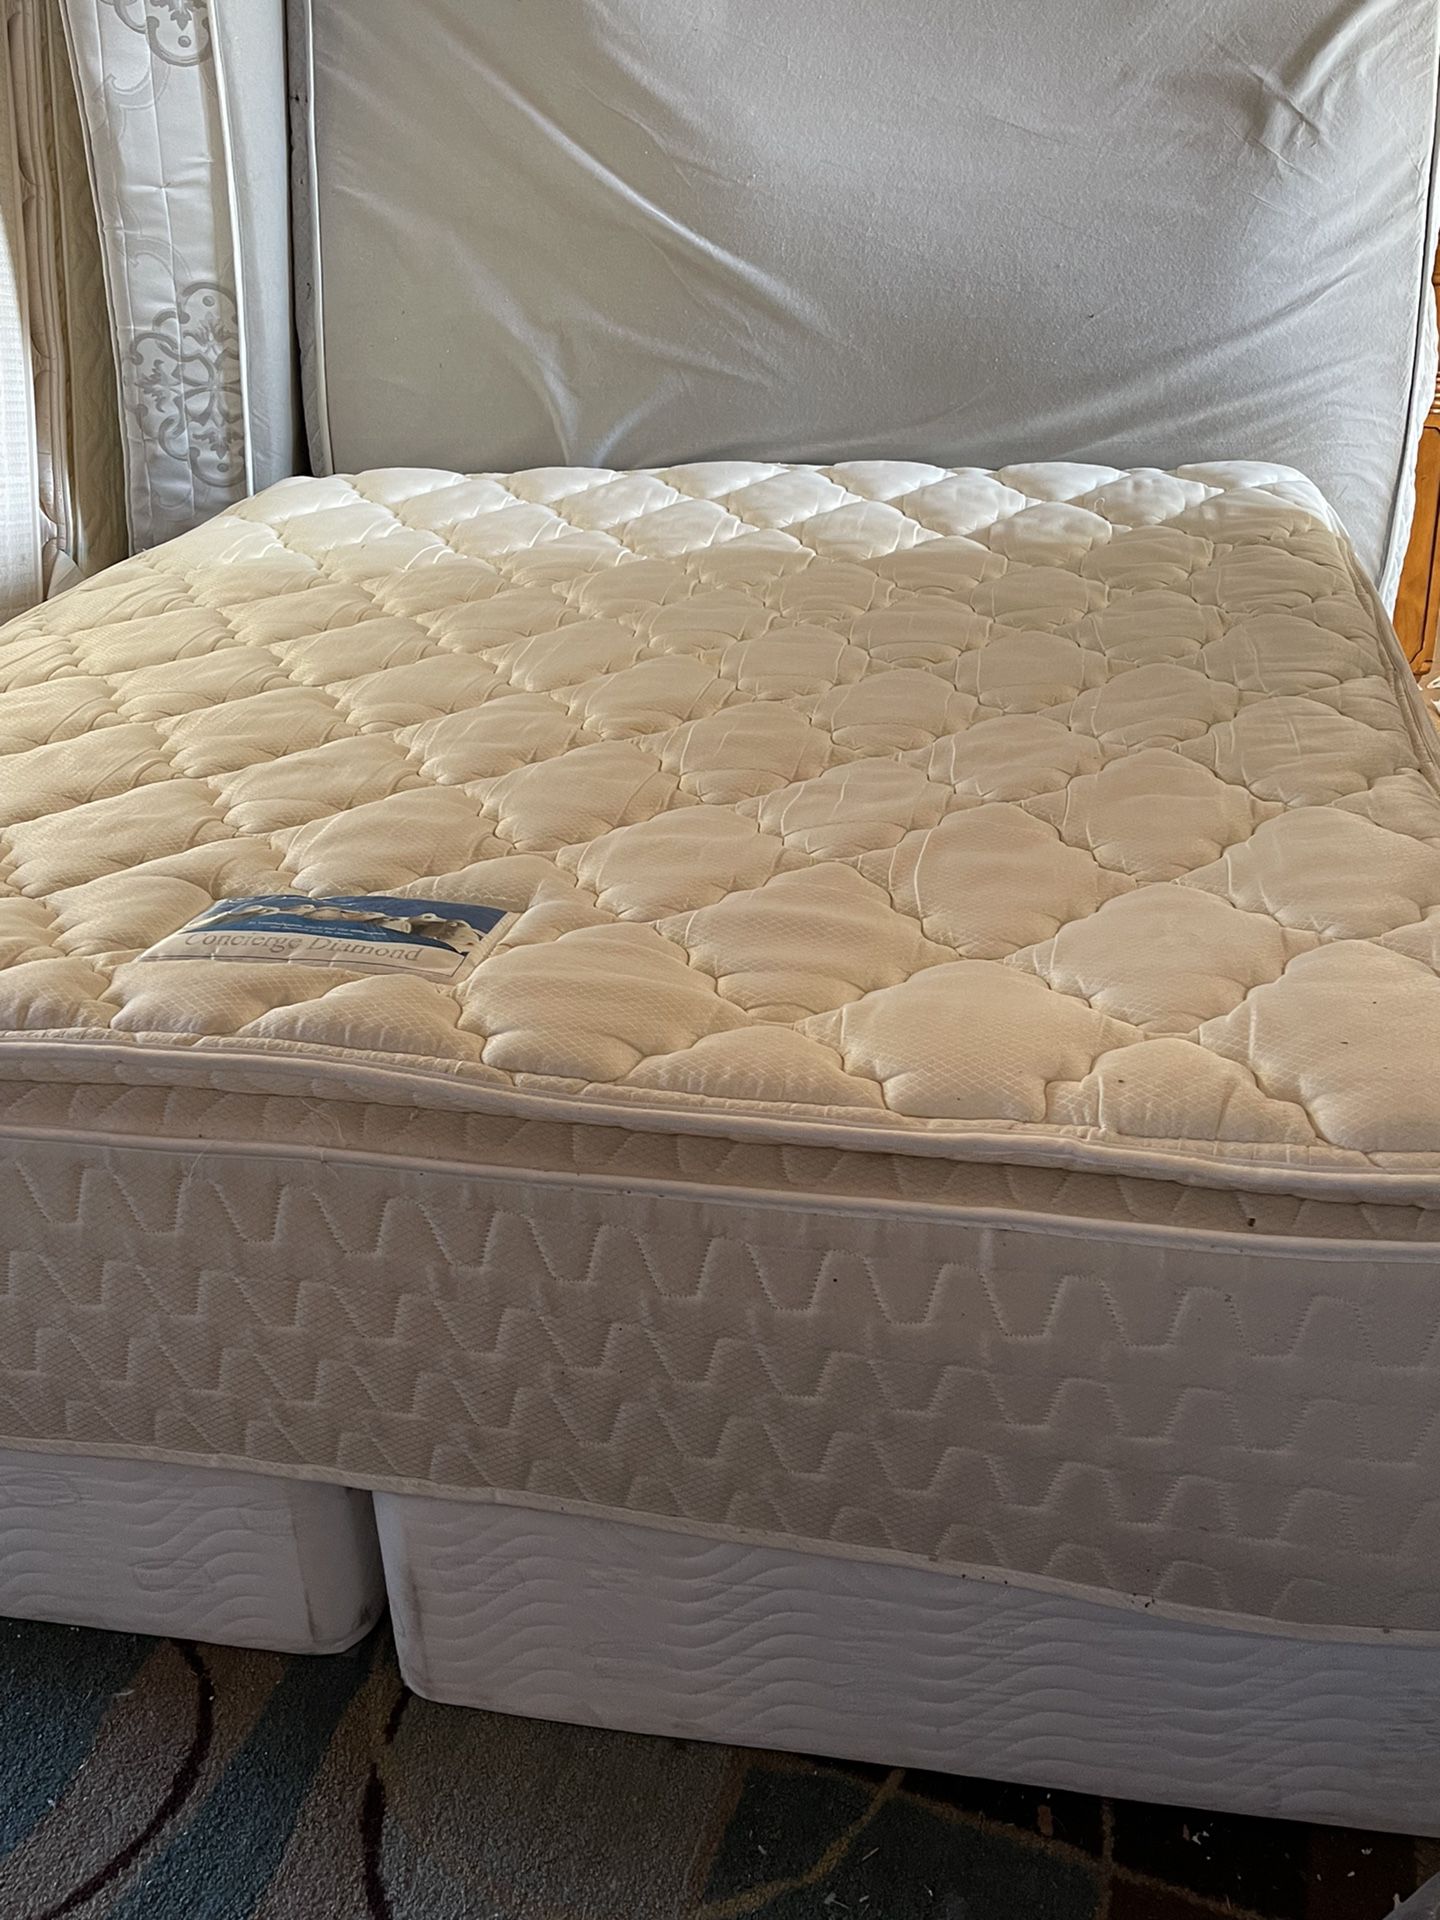 USED KING SIZE SERTA PILLOWTOP MATTRESS WITH BOX SPRING